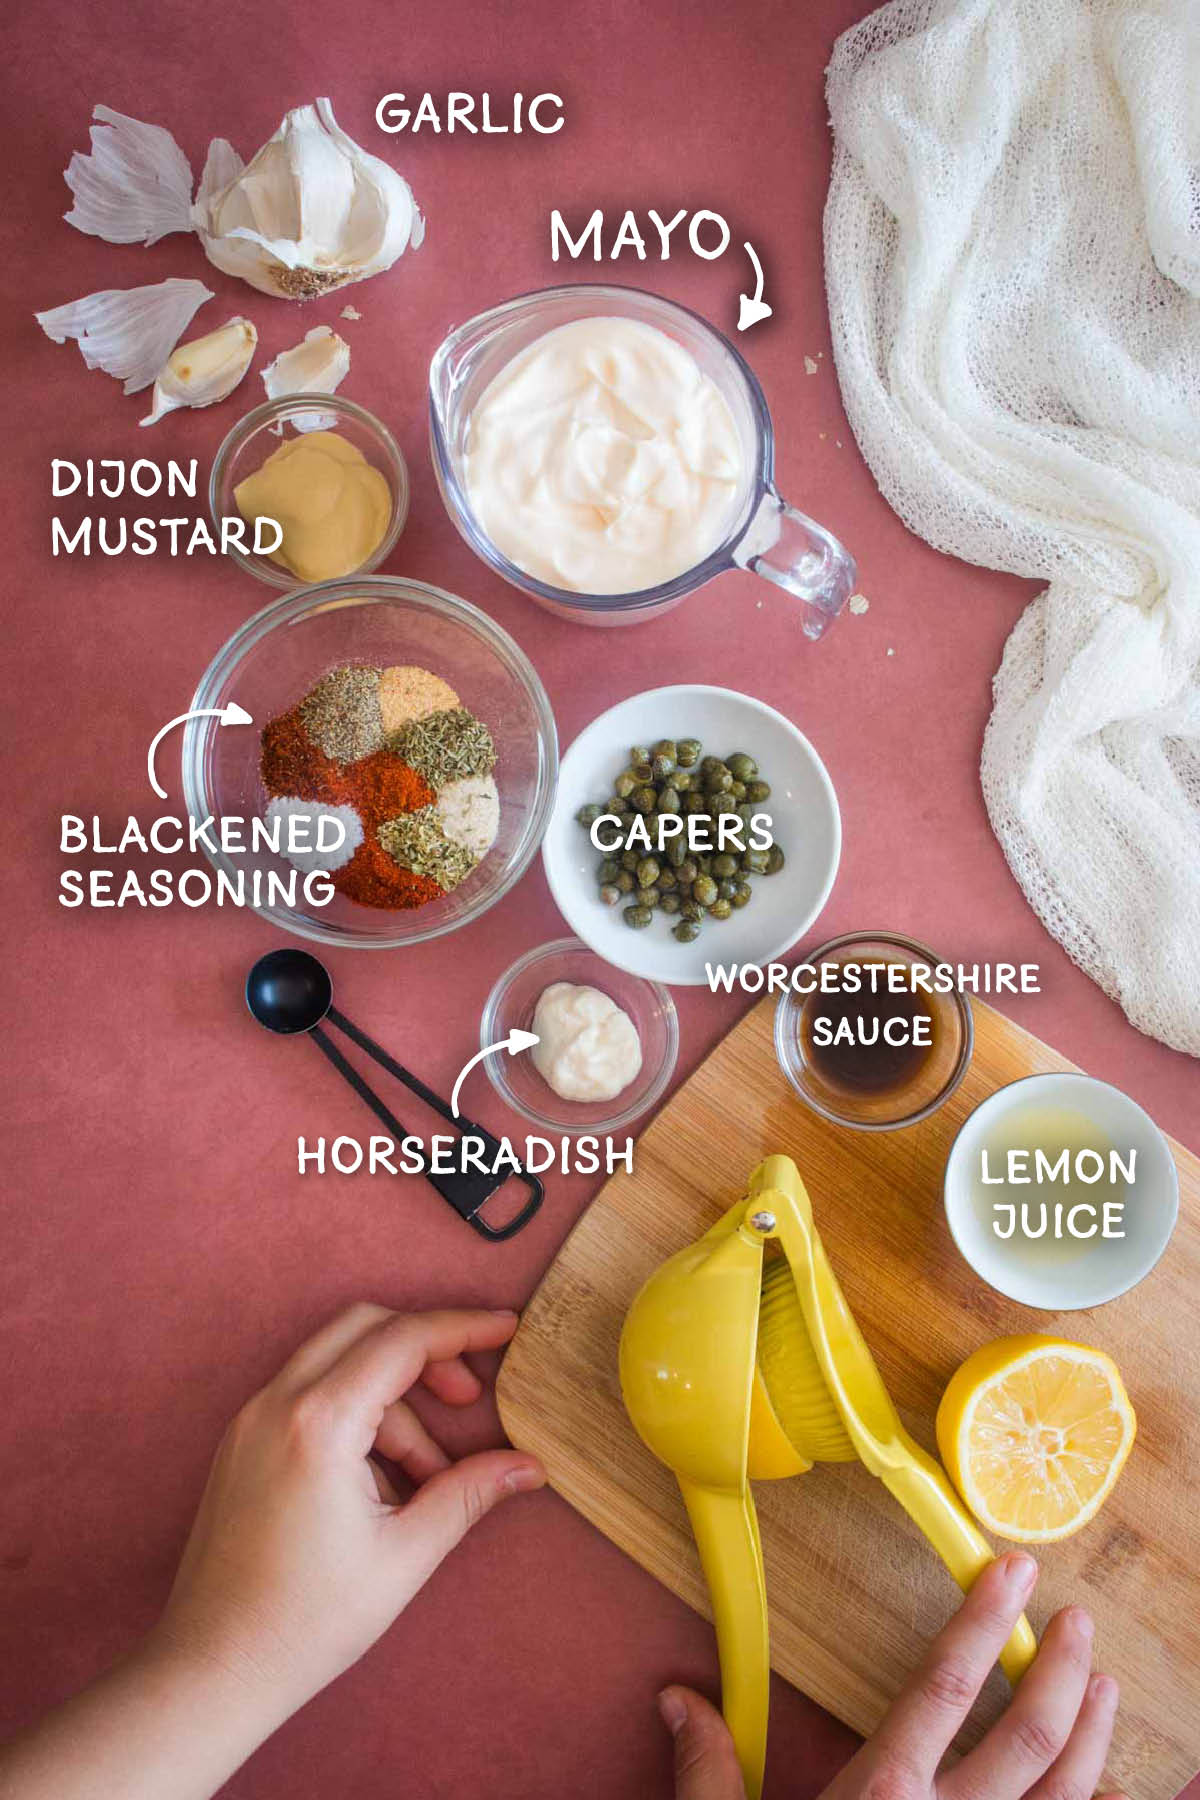 Ingredients for easy homemade Cajun remoulade sauce with blackened seasoning.